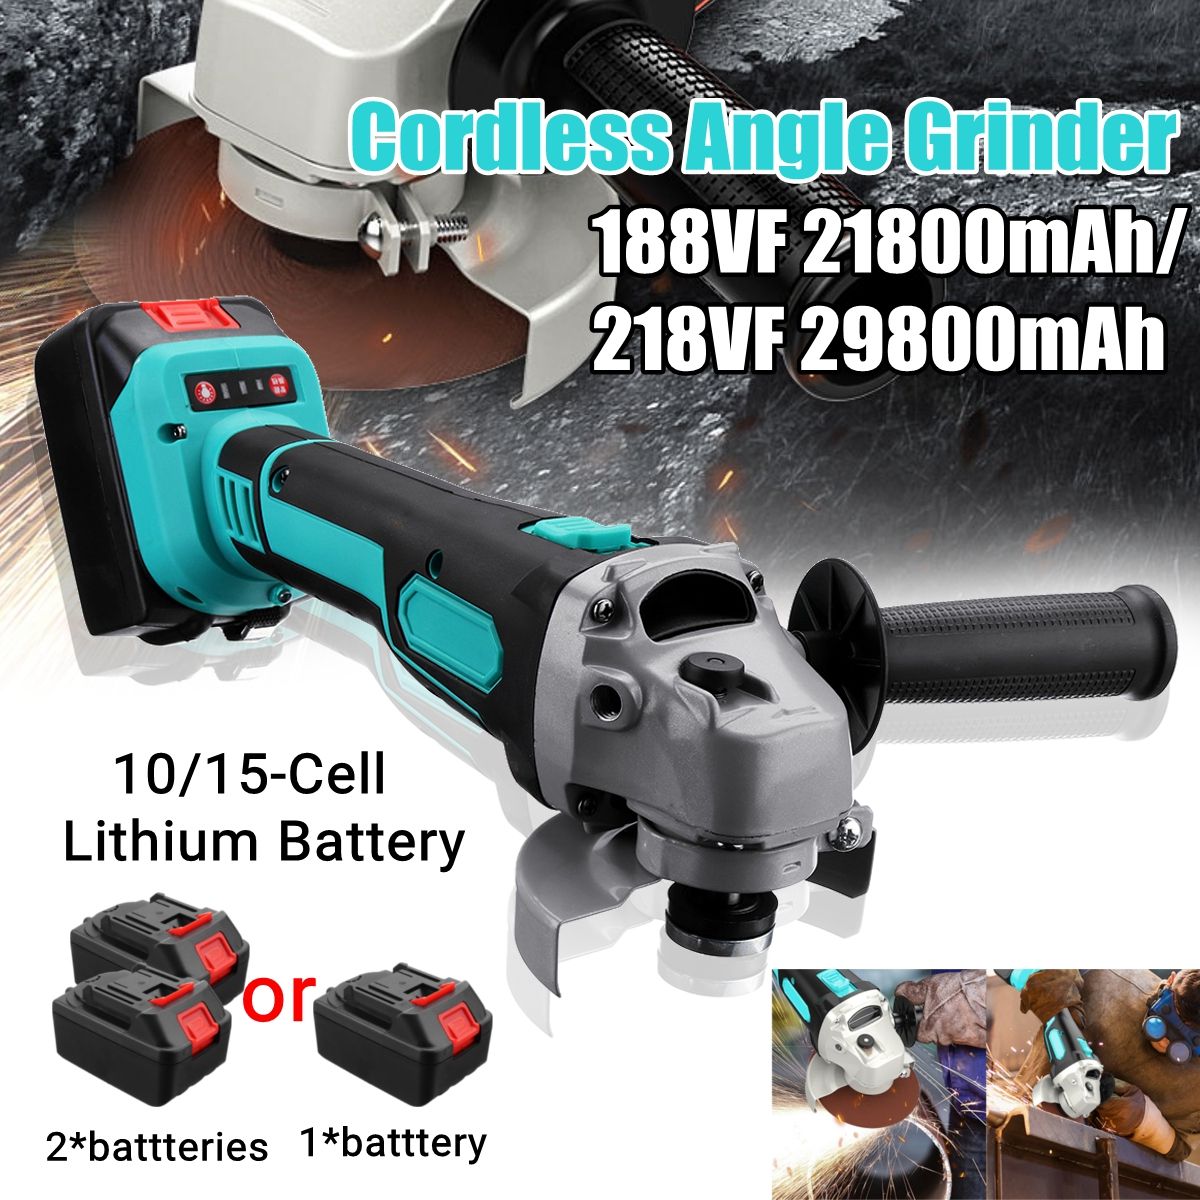 188VF218VF-Brushless-Cordless-Angle-Grinder-Electric-Power-Polishing-Cutting-W-1-or-2-Li-ion-Battery-1431416